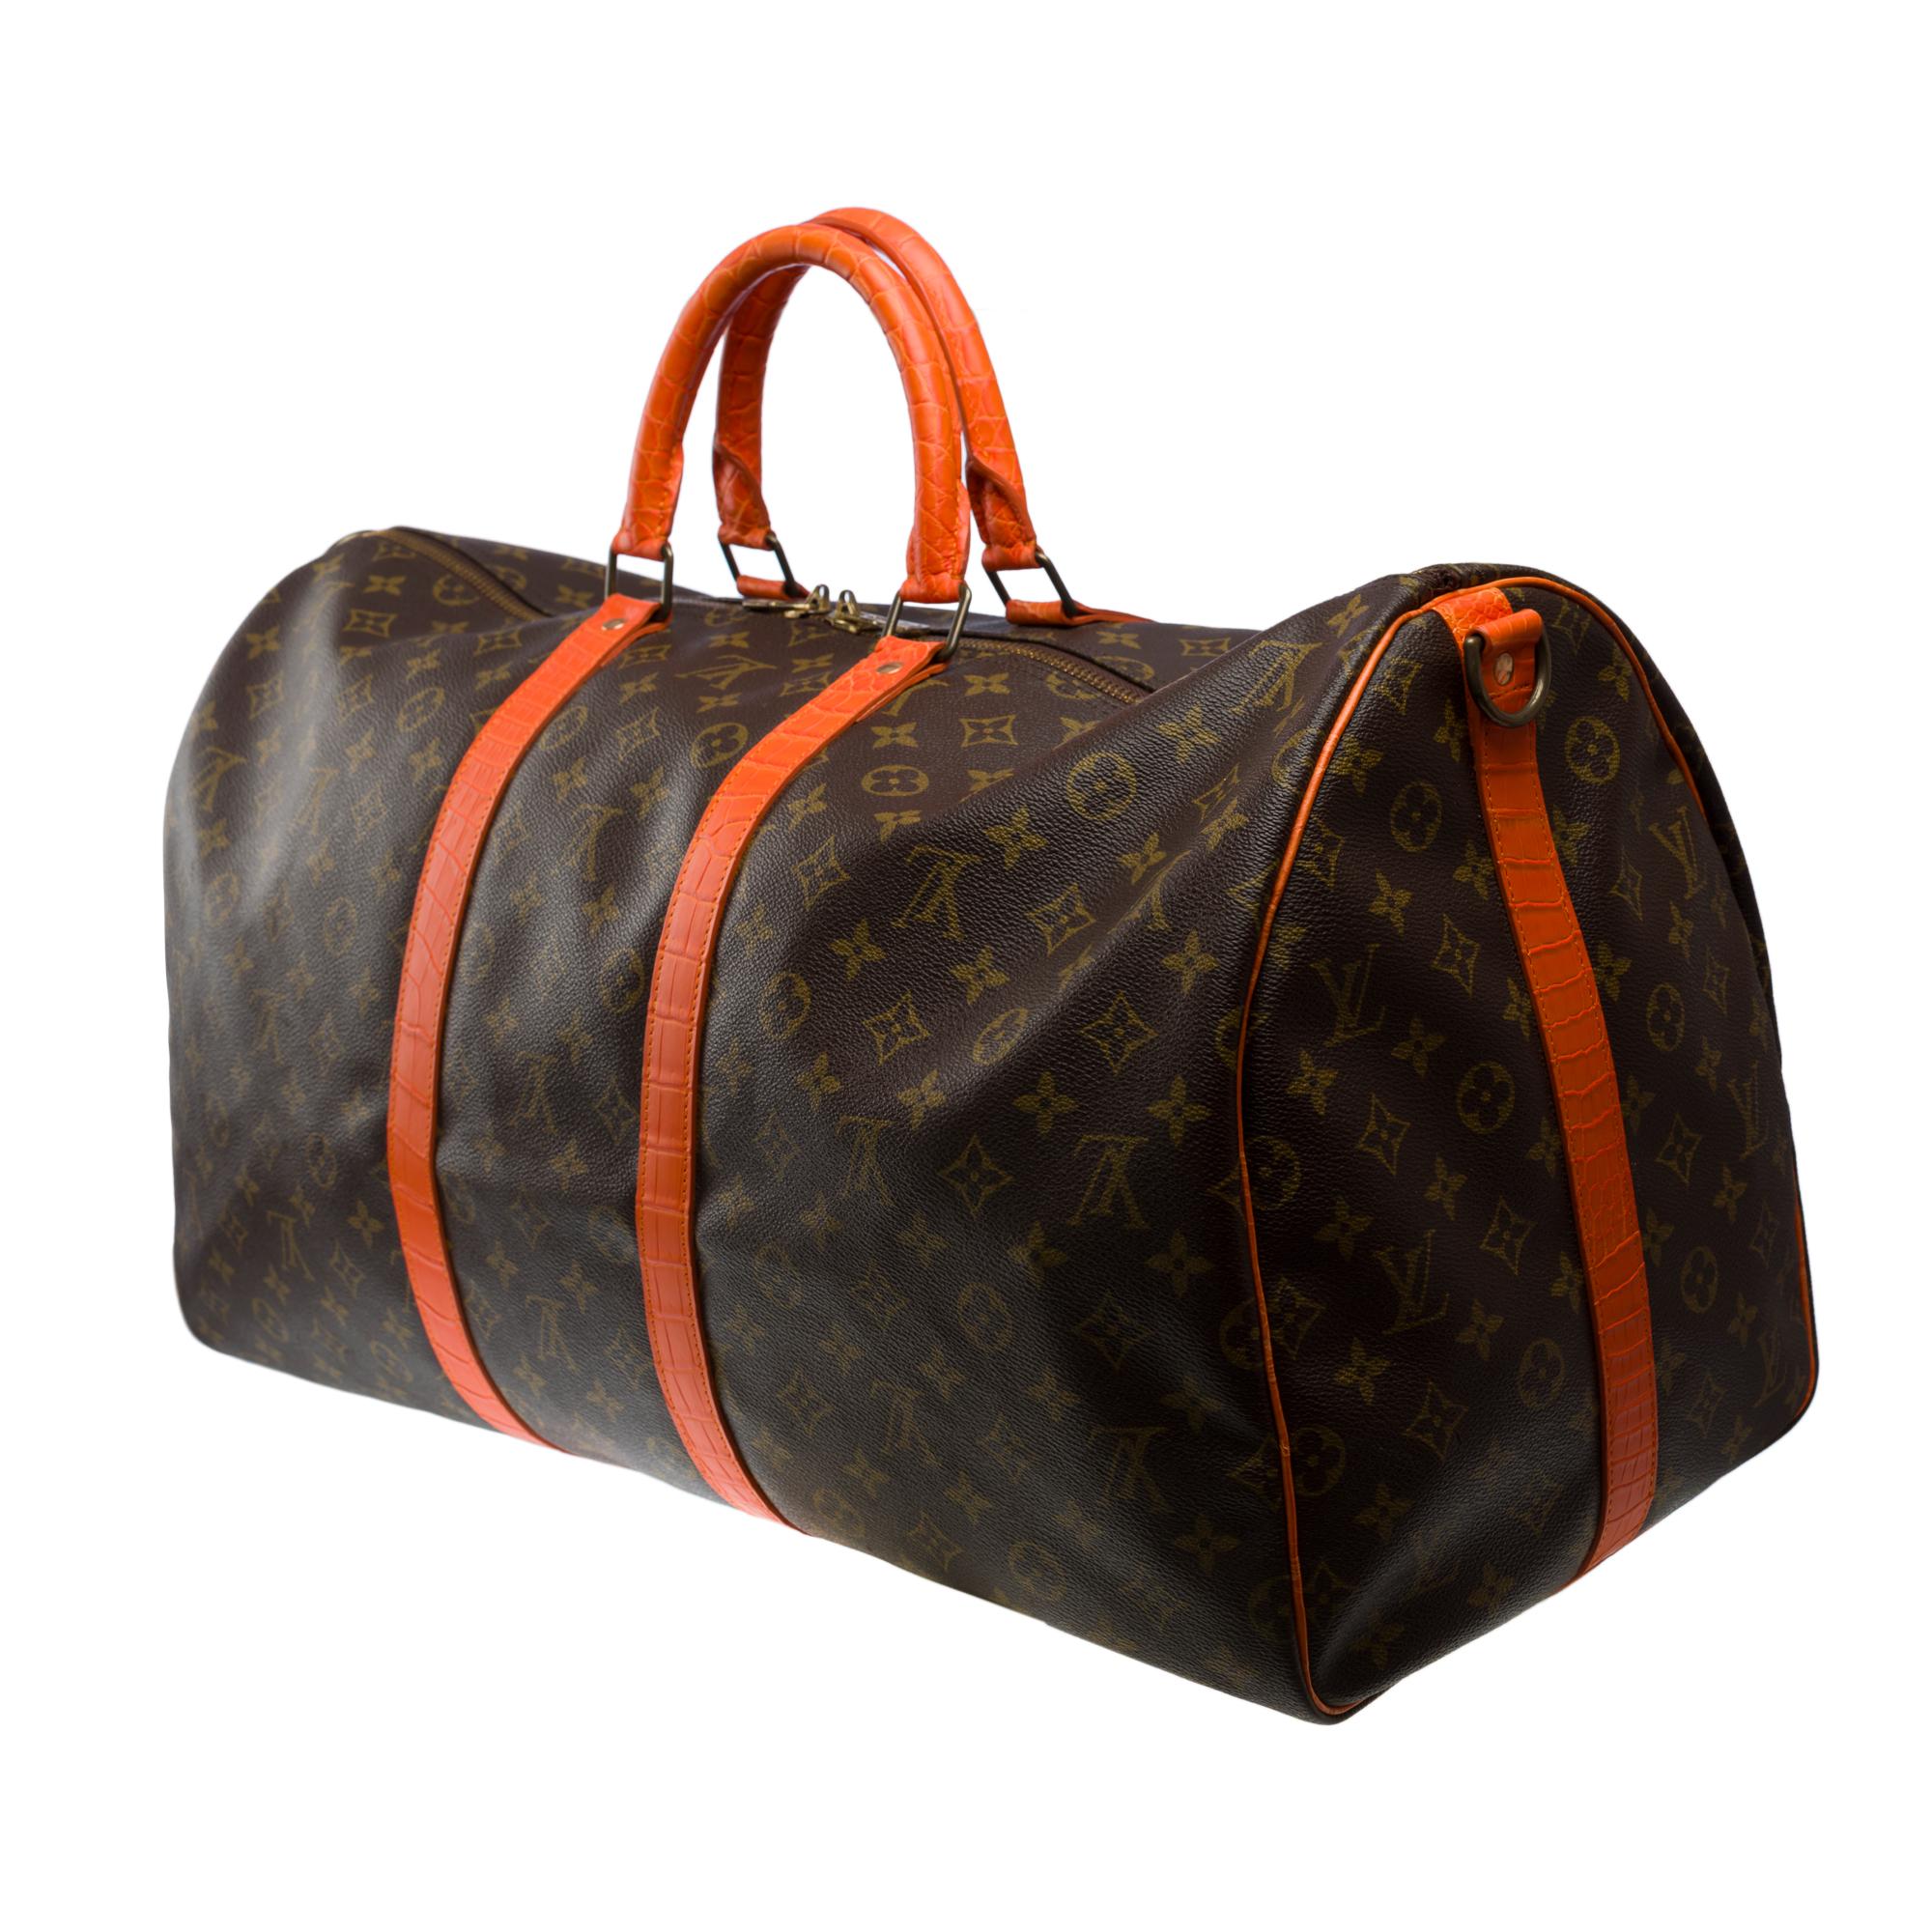 Customized Louis Vuitton Keepall 55 strap Travel bag with Orange Crocodile For Sale 1